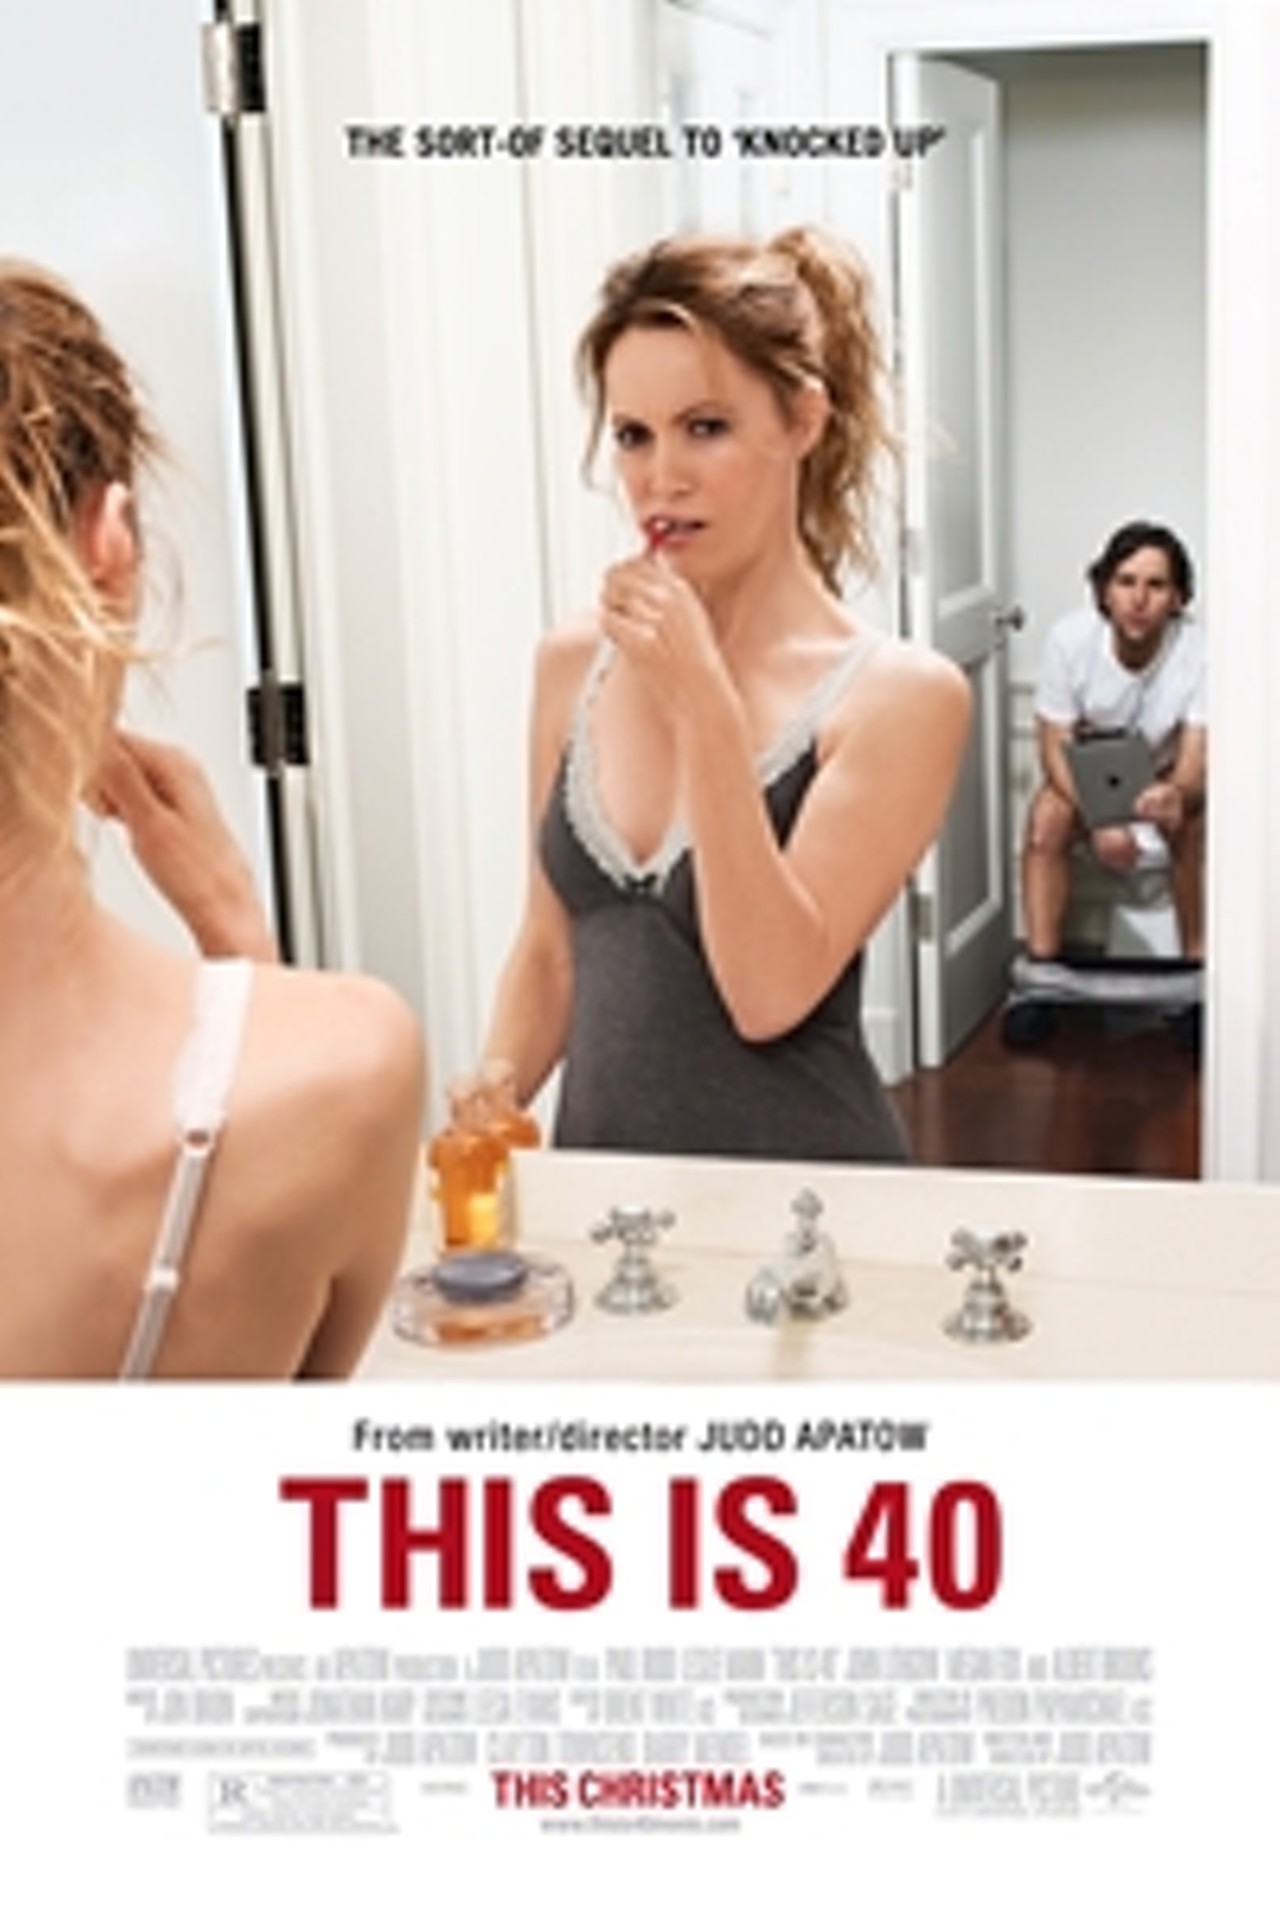 This Is 40 - A Look Inside